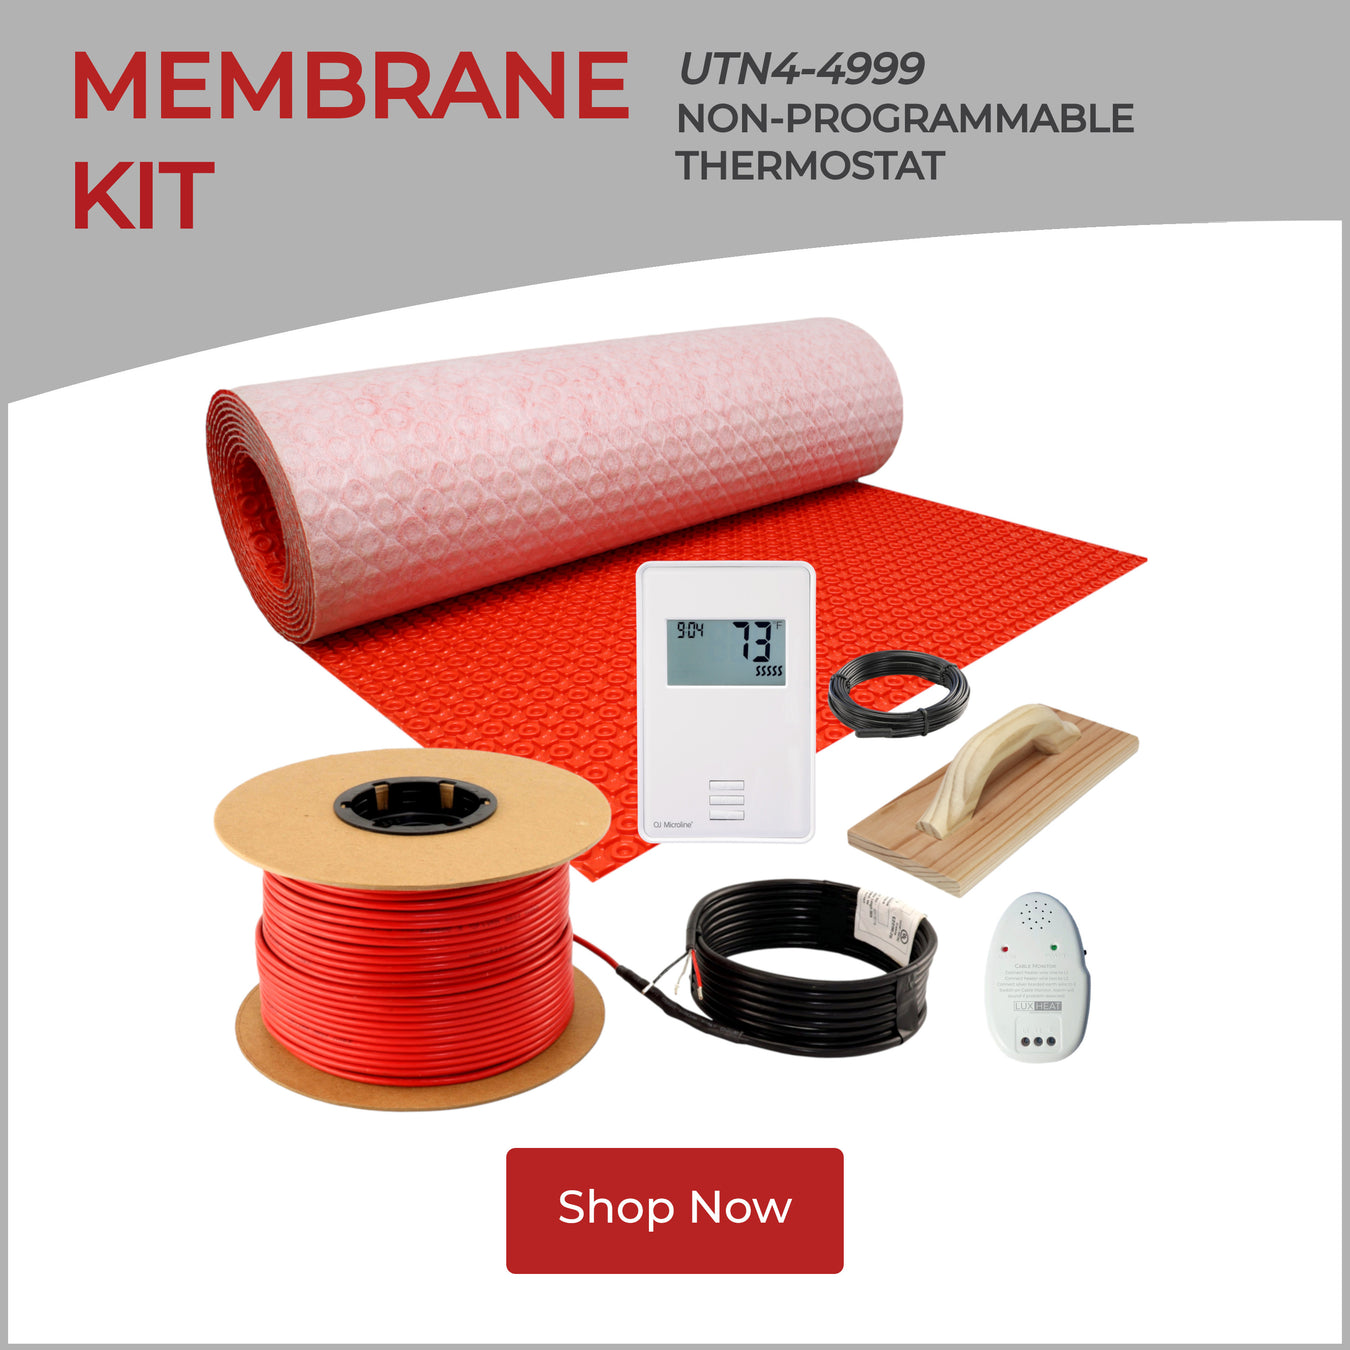 Overview_-_Membrane_Kit_with_UTN4